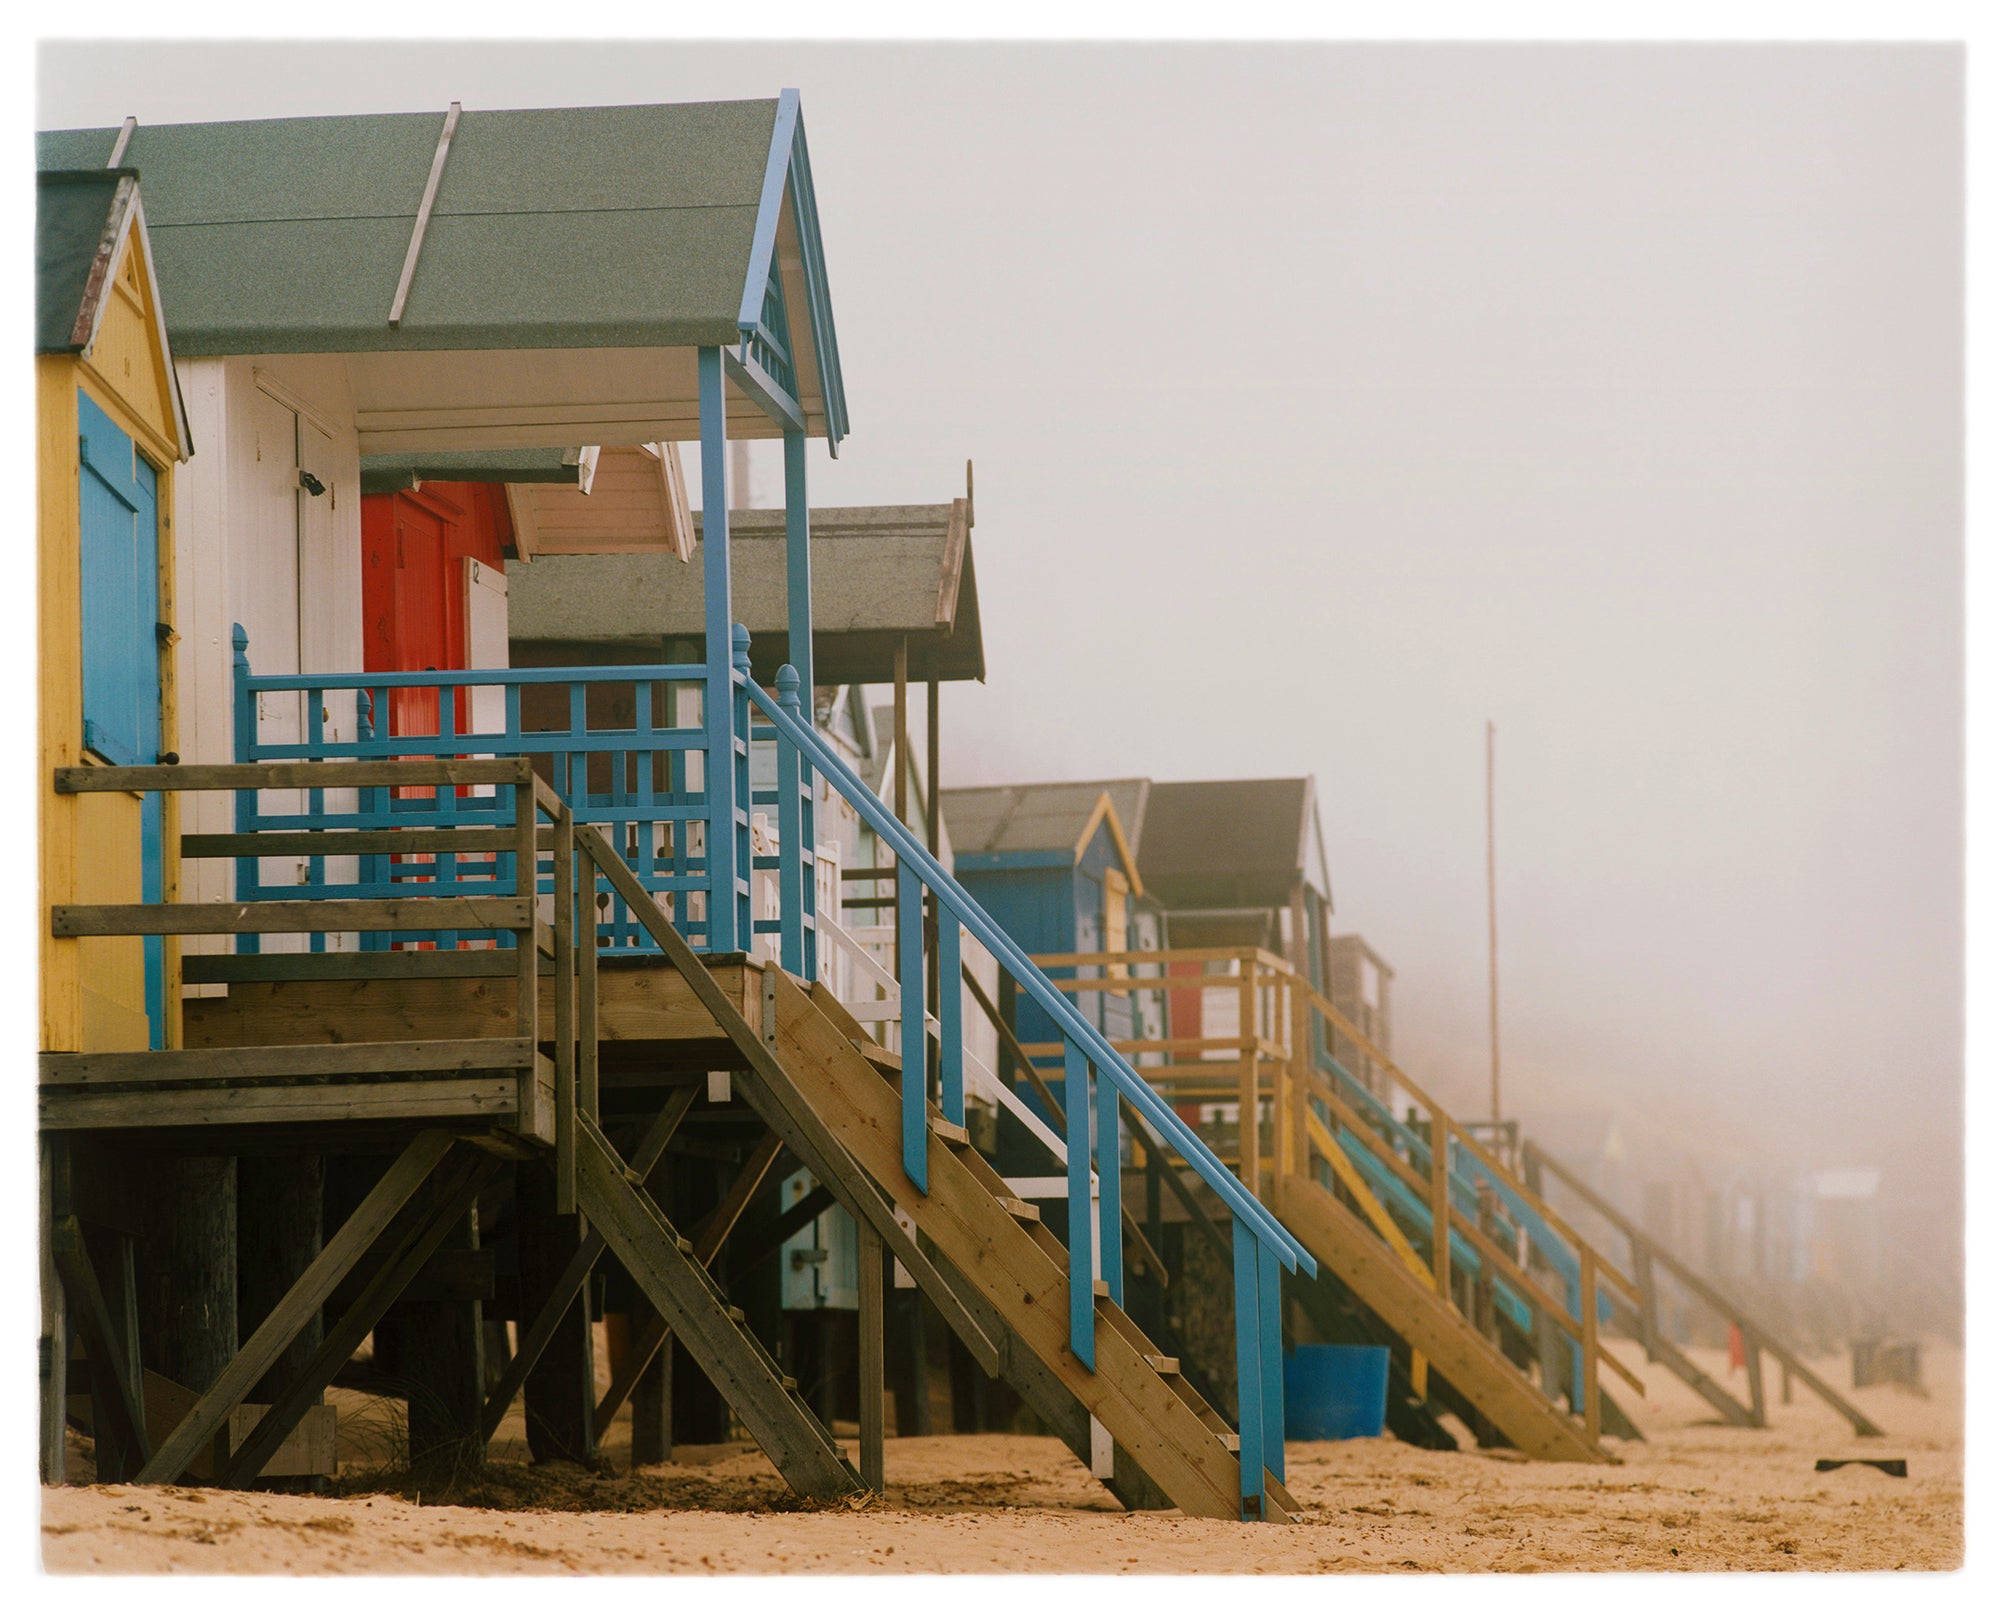 'Beach Huts', photographed by Richard Heeps in one of his favourite areas of the UK, the port town of Wells-next-the-sea, Norfolk. This piece captures the classic quintessential beach hut on an atmospherically foggy day.